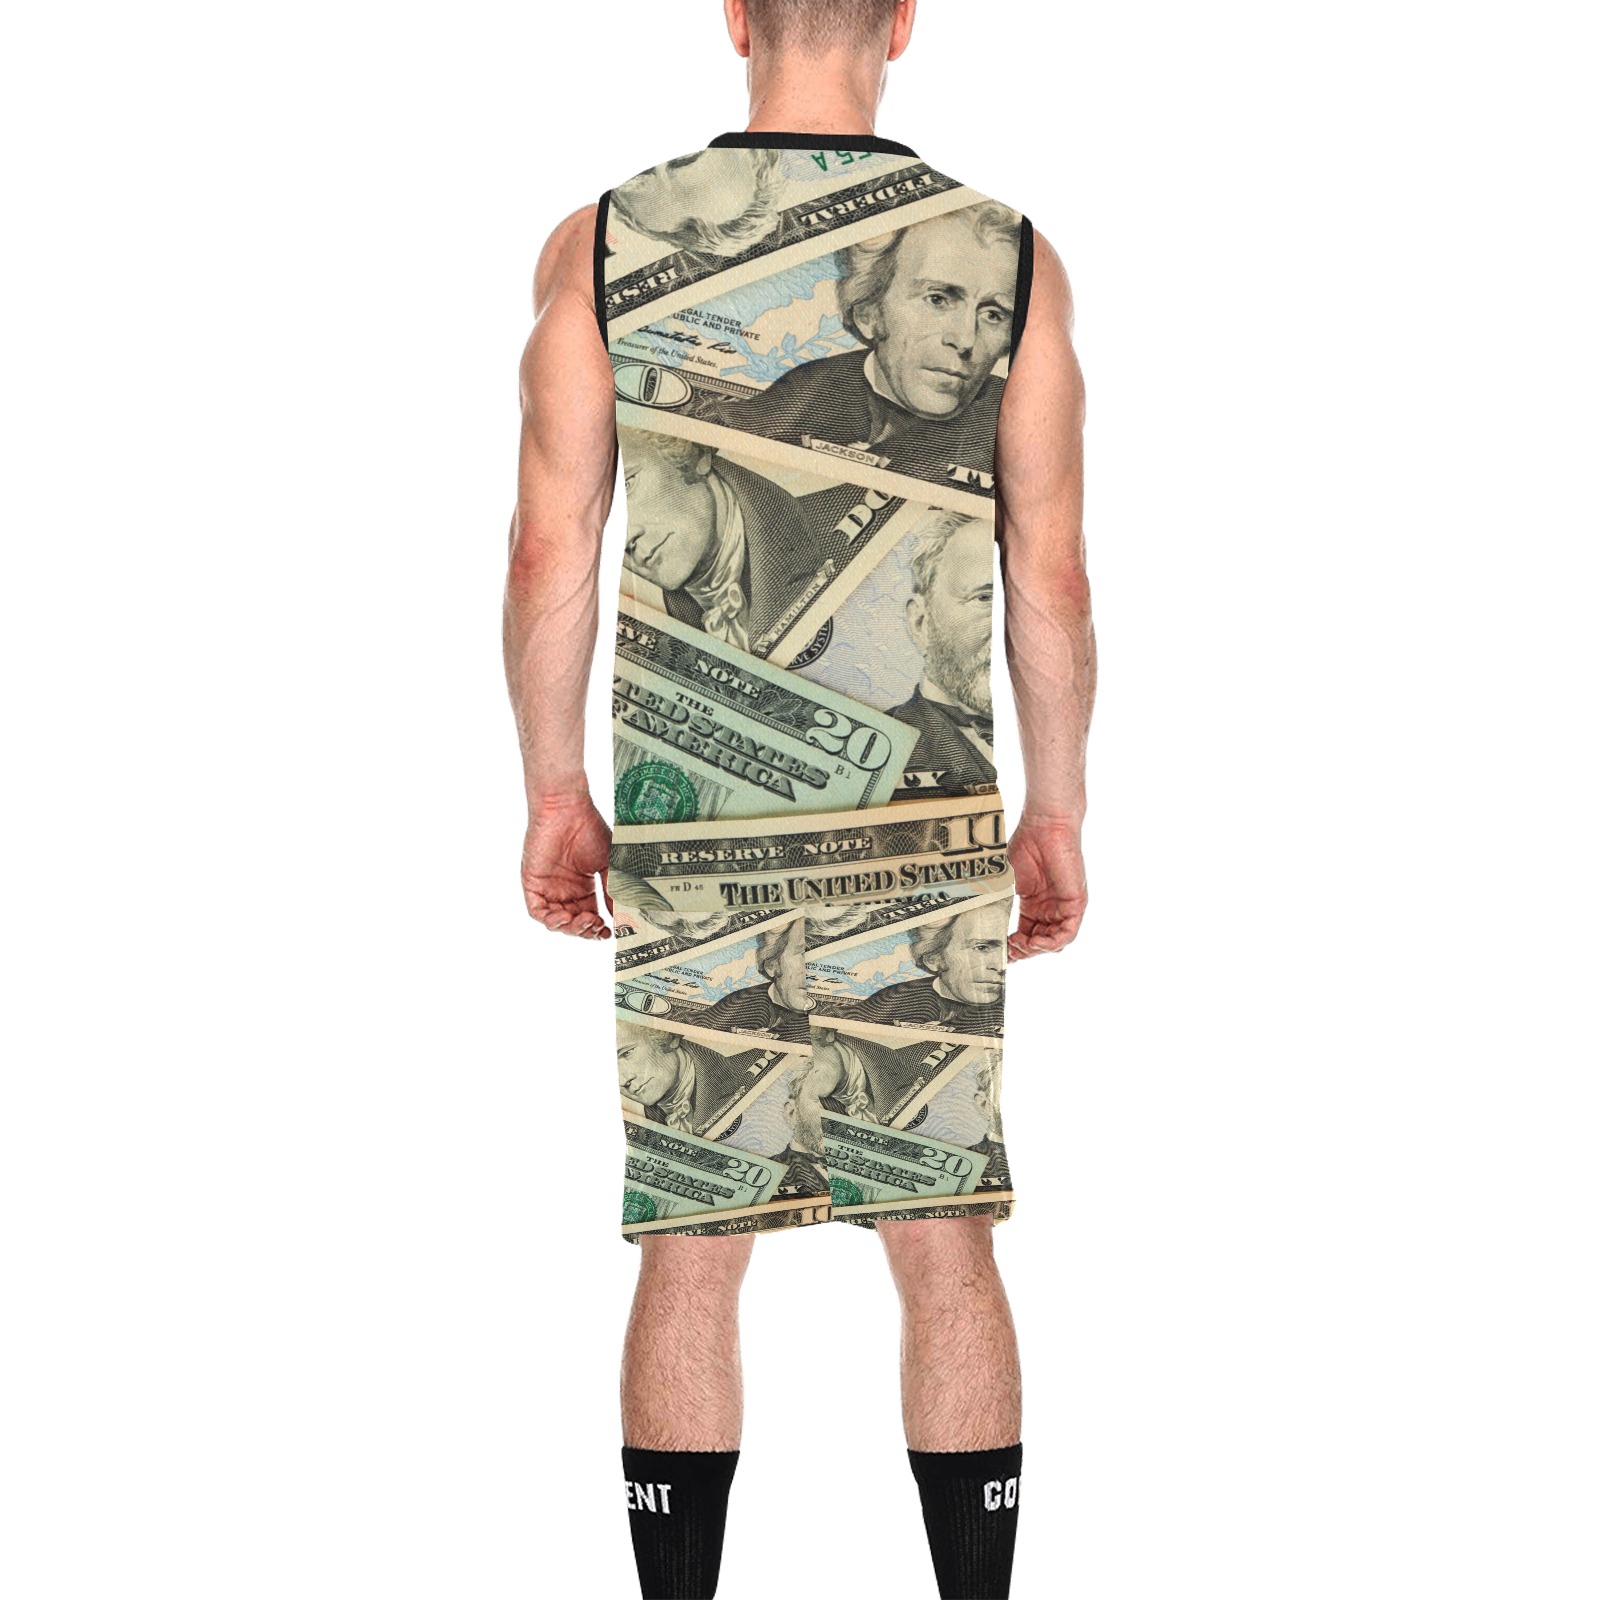 US PAPER CURRENCY All Over Print Basketball Uniform